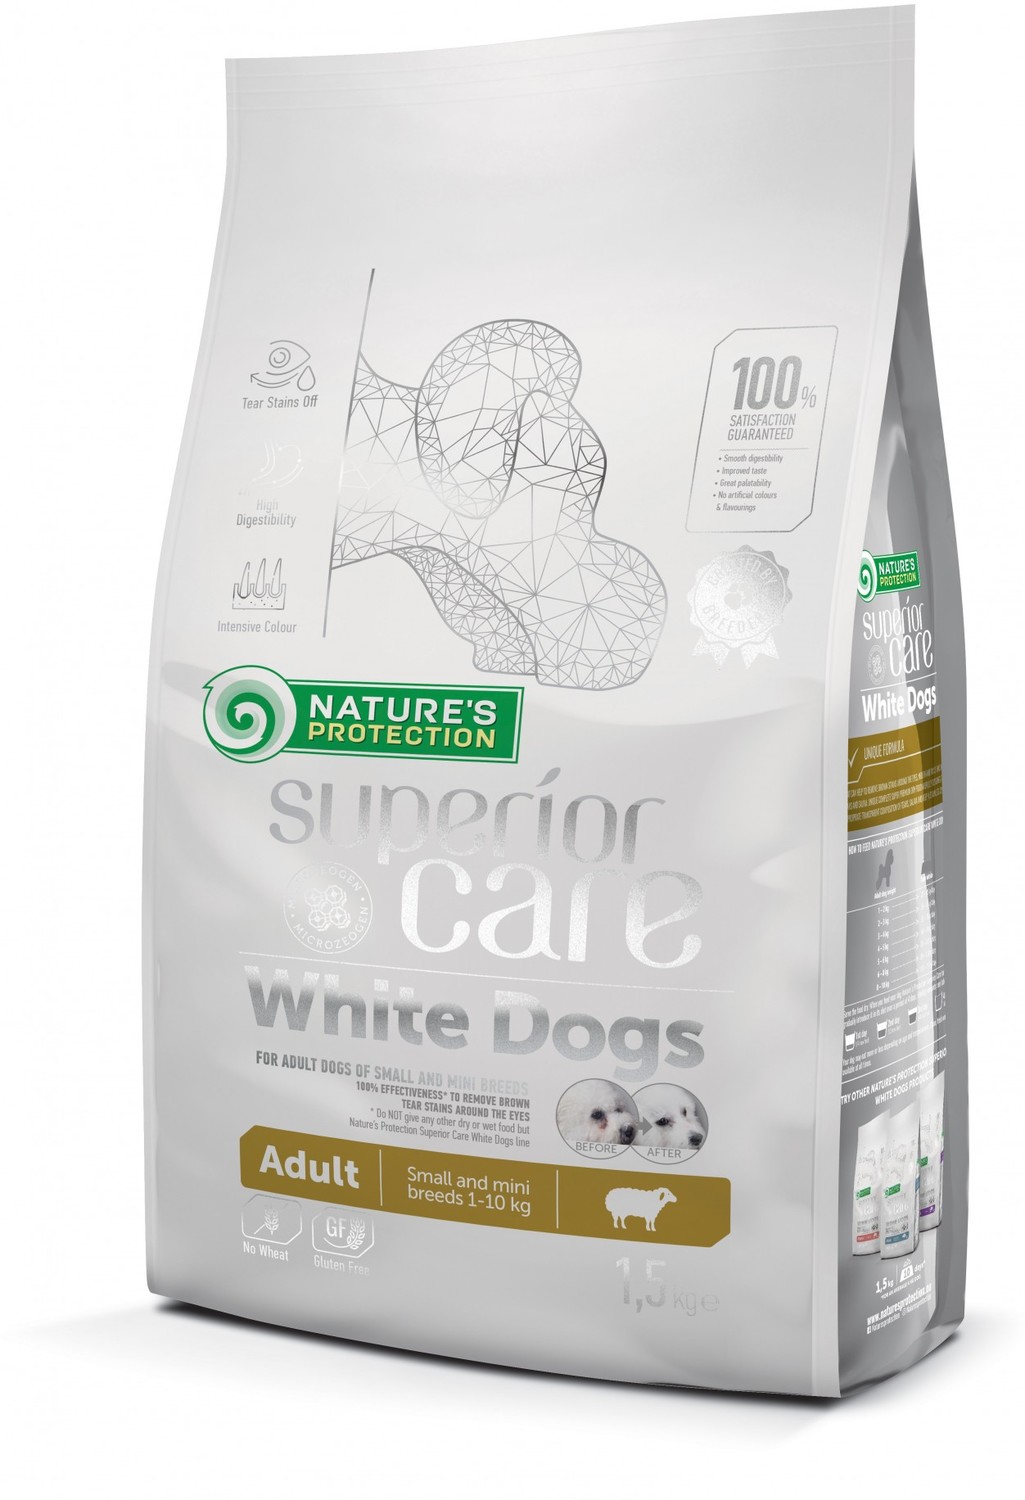 Nature's Protection Superior Care White Dogs Grain Free Adult Small & Mini Breeds Lamb